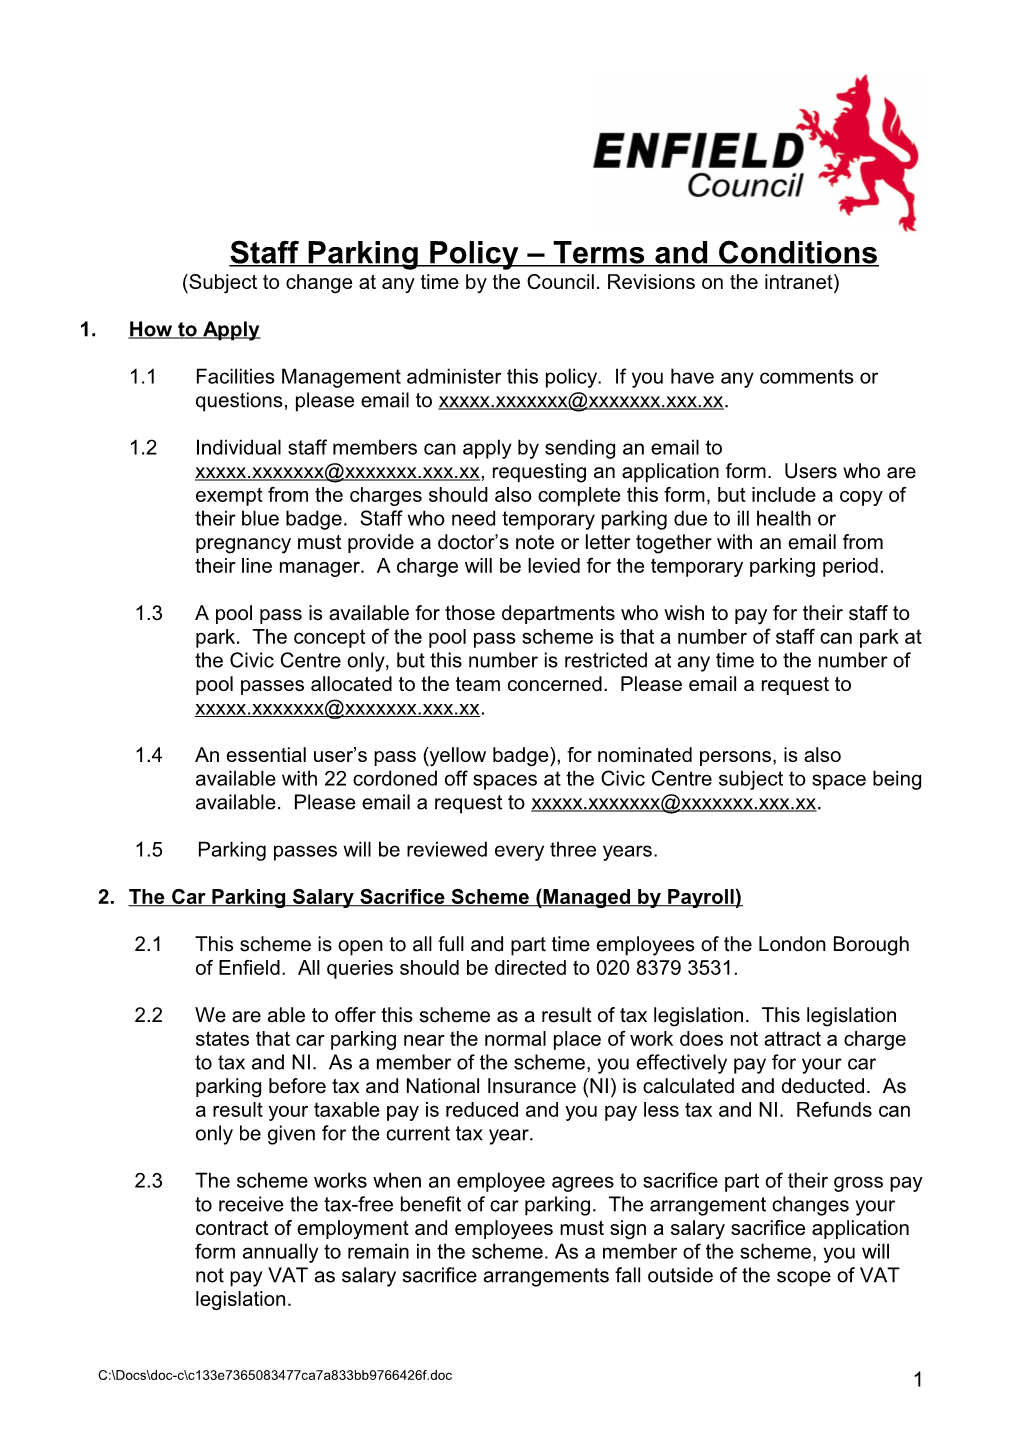 Staff Parking Policy Terms and Conditions